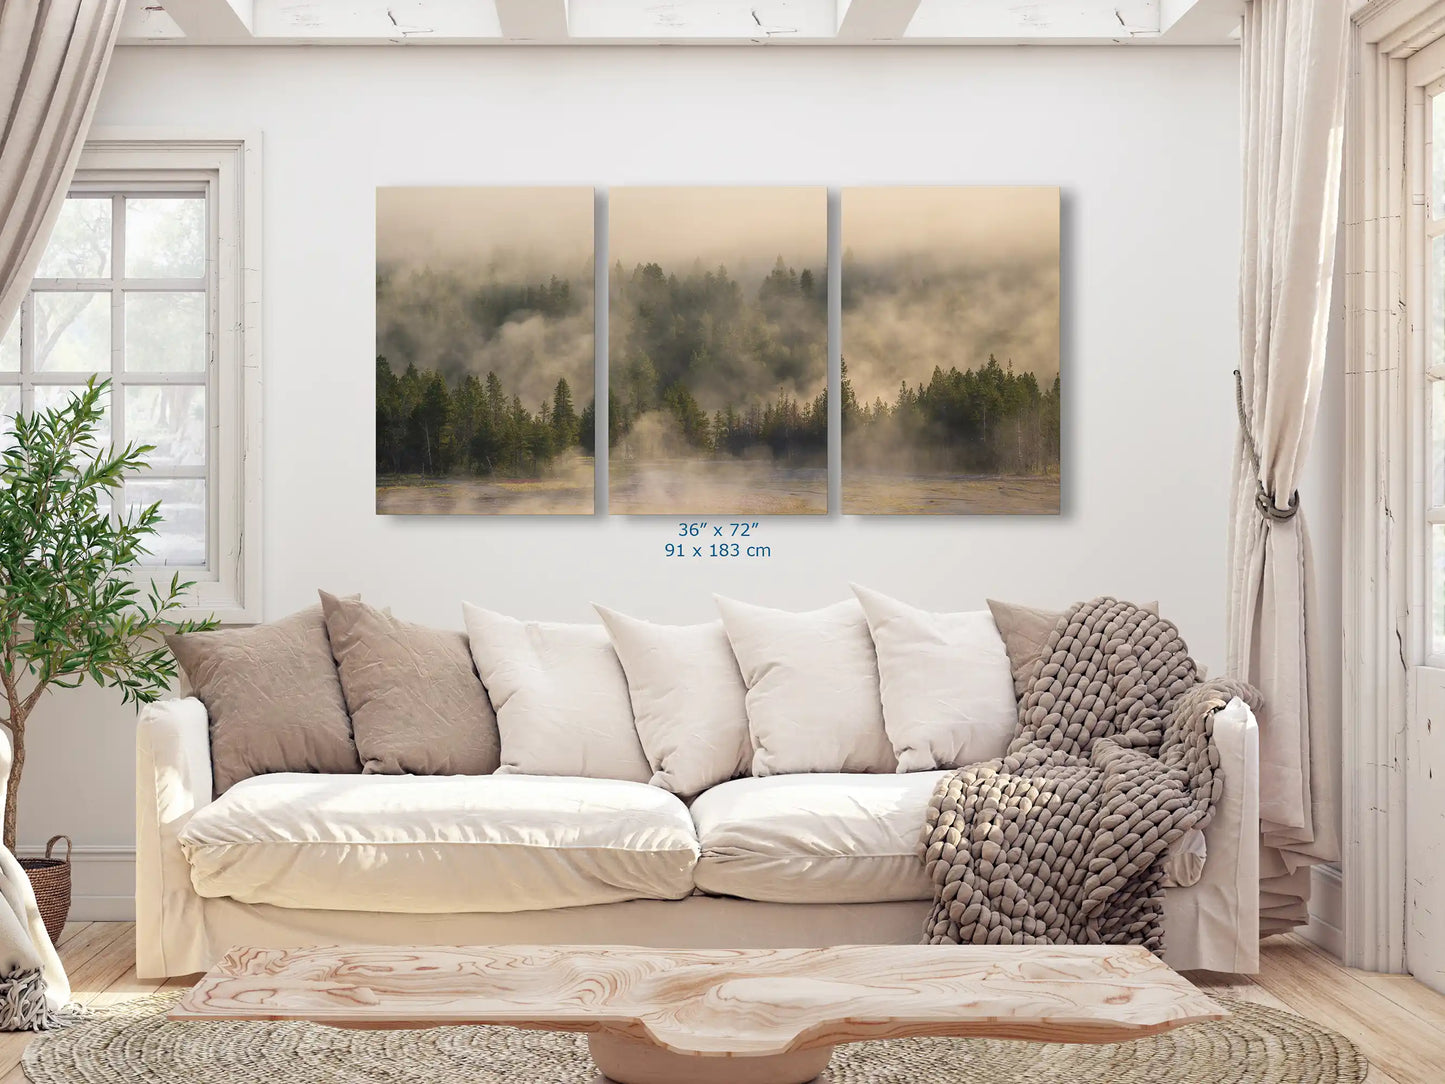 Large triptych canvas prints, 36x72 each, of Yellowstone's misty forest, spanning the length of a living room wall for a dramatic effect.